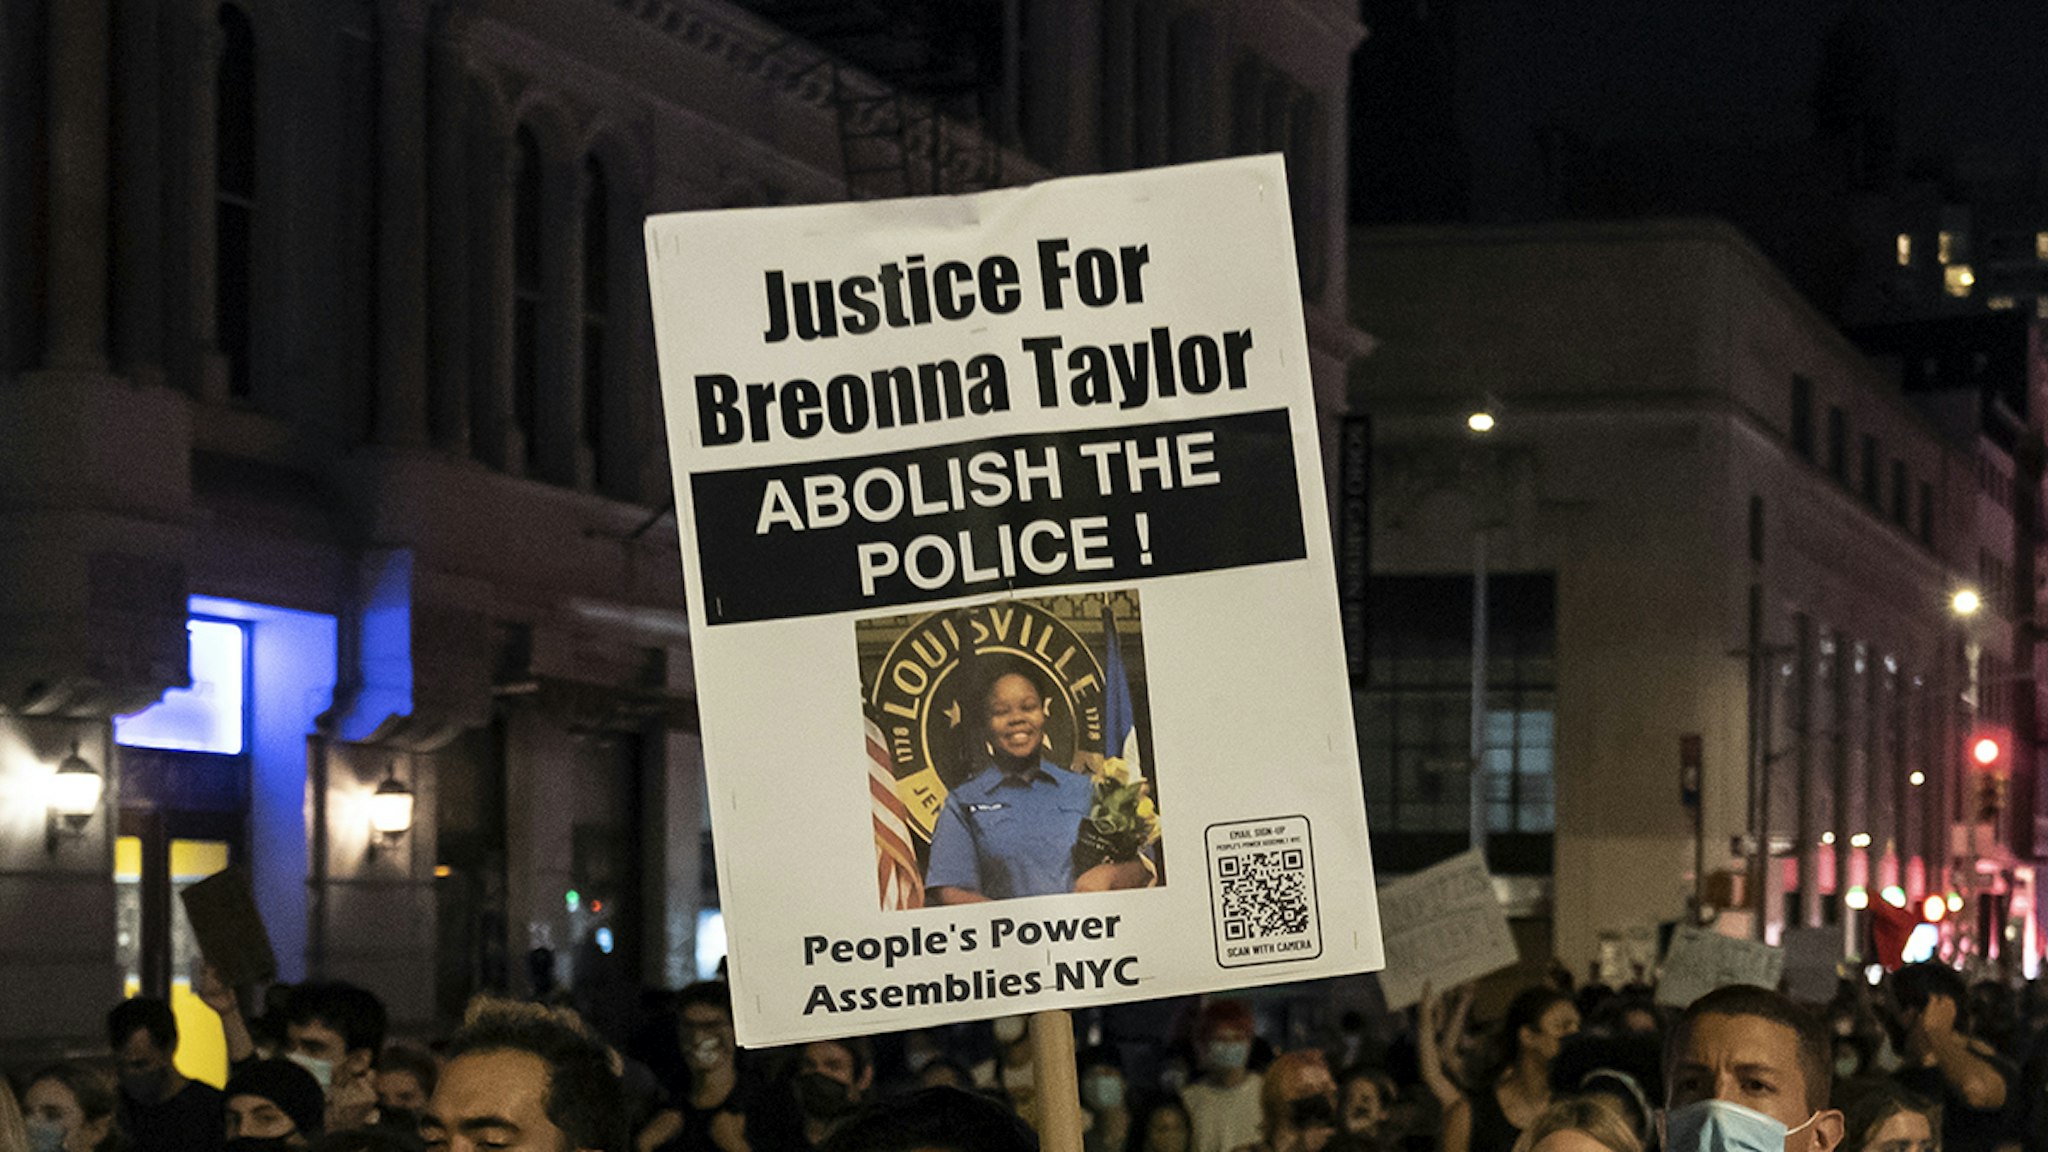 Hundreds of people protest on streets in New York after police officers were not charged for killing Breonna Taylor. Protesters blocked traffic on streets of Manhattan and Brooklyn as well as on Manhattan and Williamsburg bridges. Demonstrations started at 7 PM and went till after 1 AM. Kentucky grand jury on Wednesday brought no charges against Louisville police in the killing of Breonna Taylor. (Photo by Lev Radin/Pacific Press/LightRocket via Getty Images)